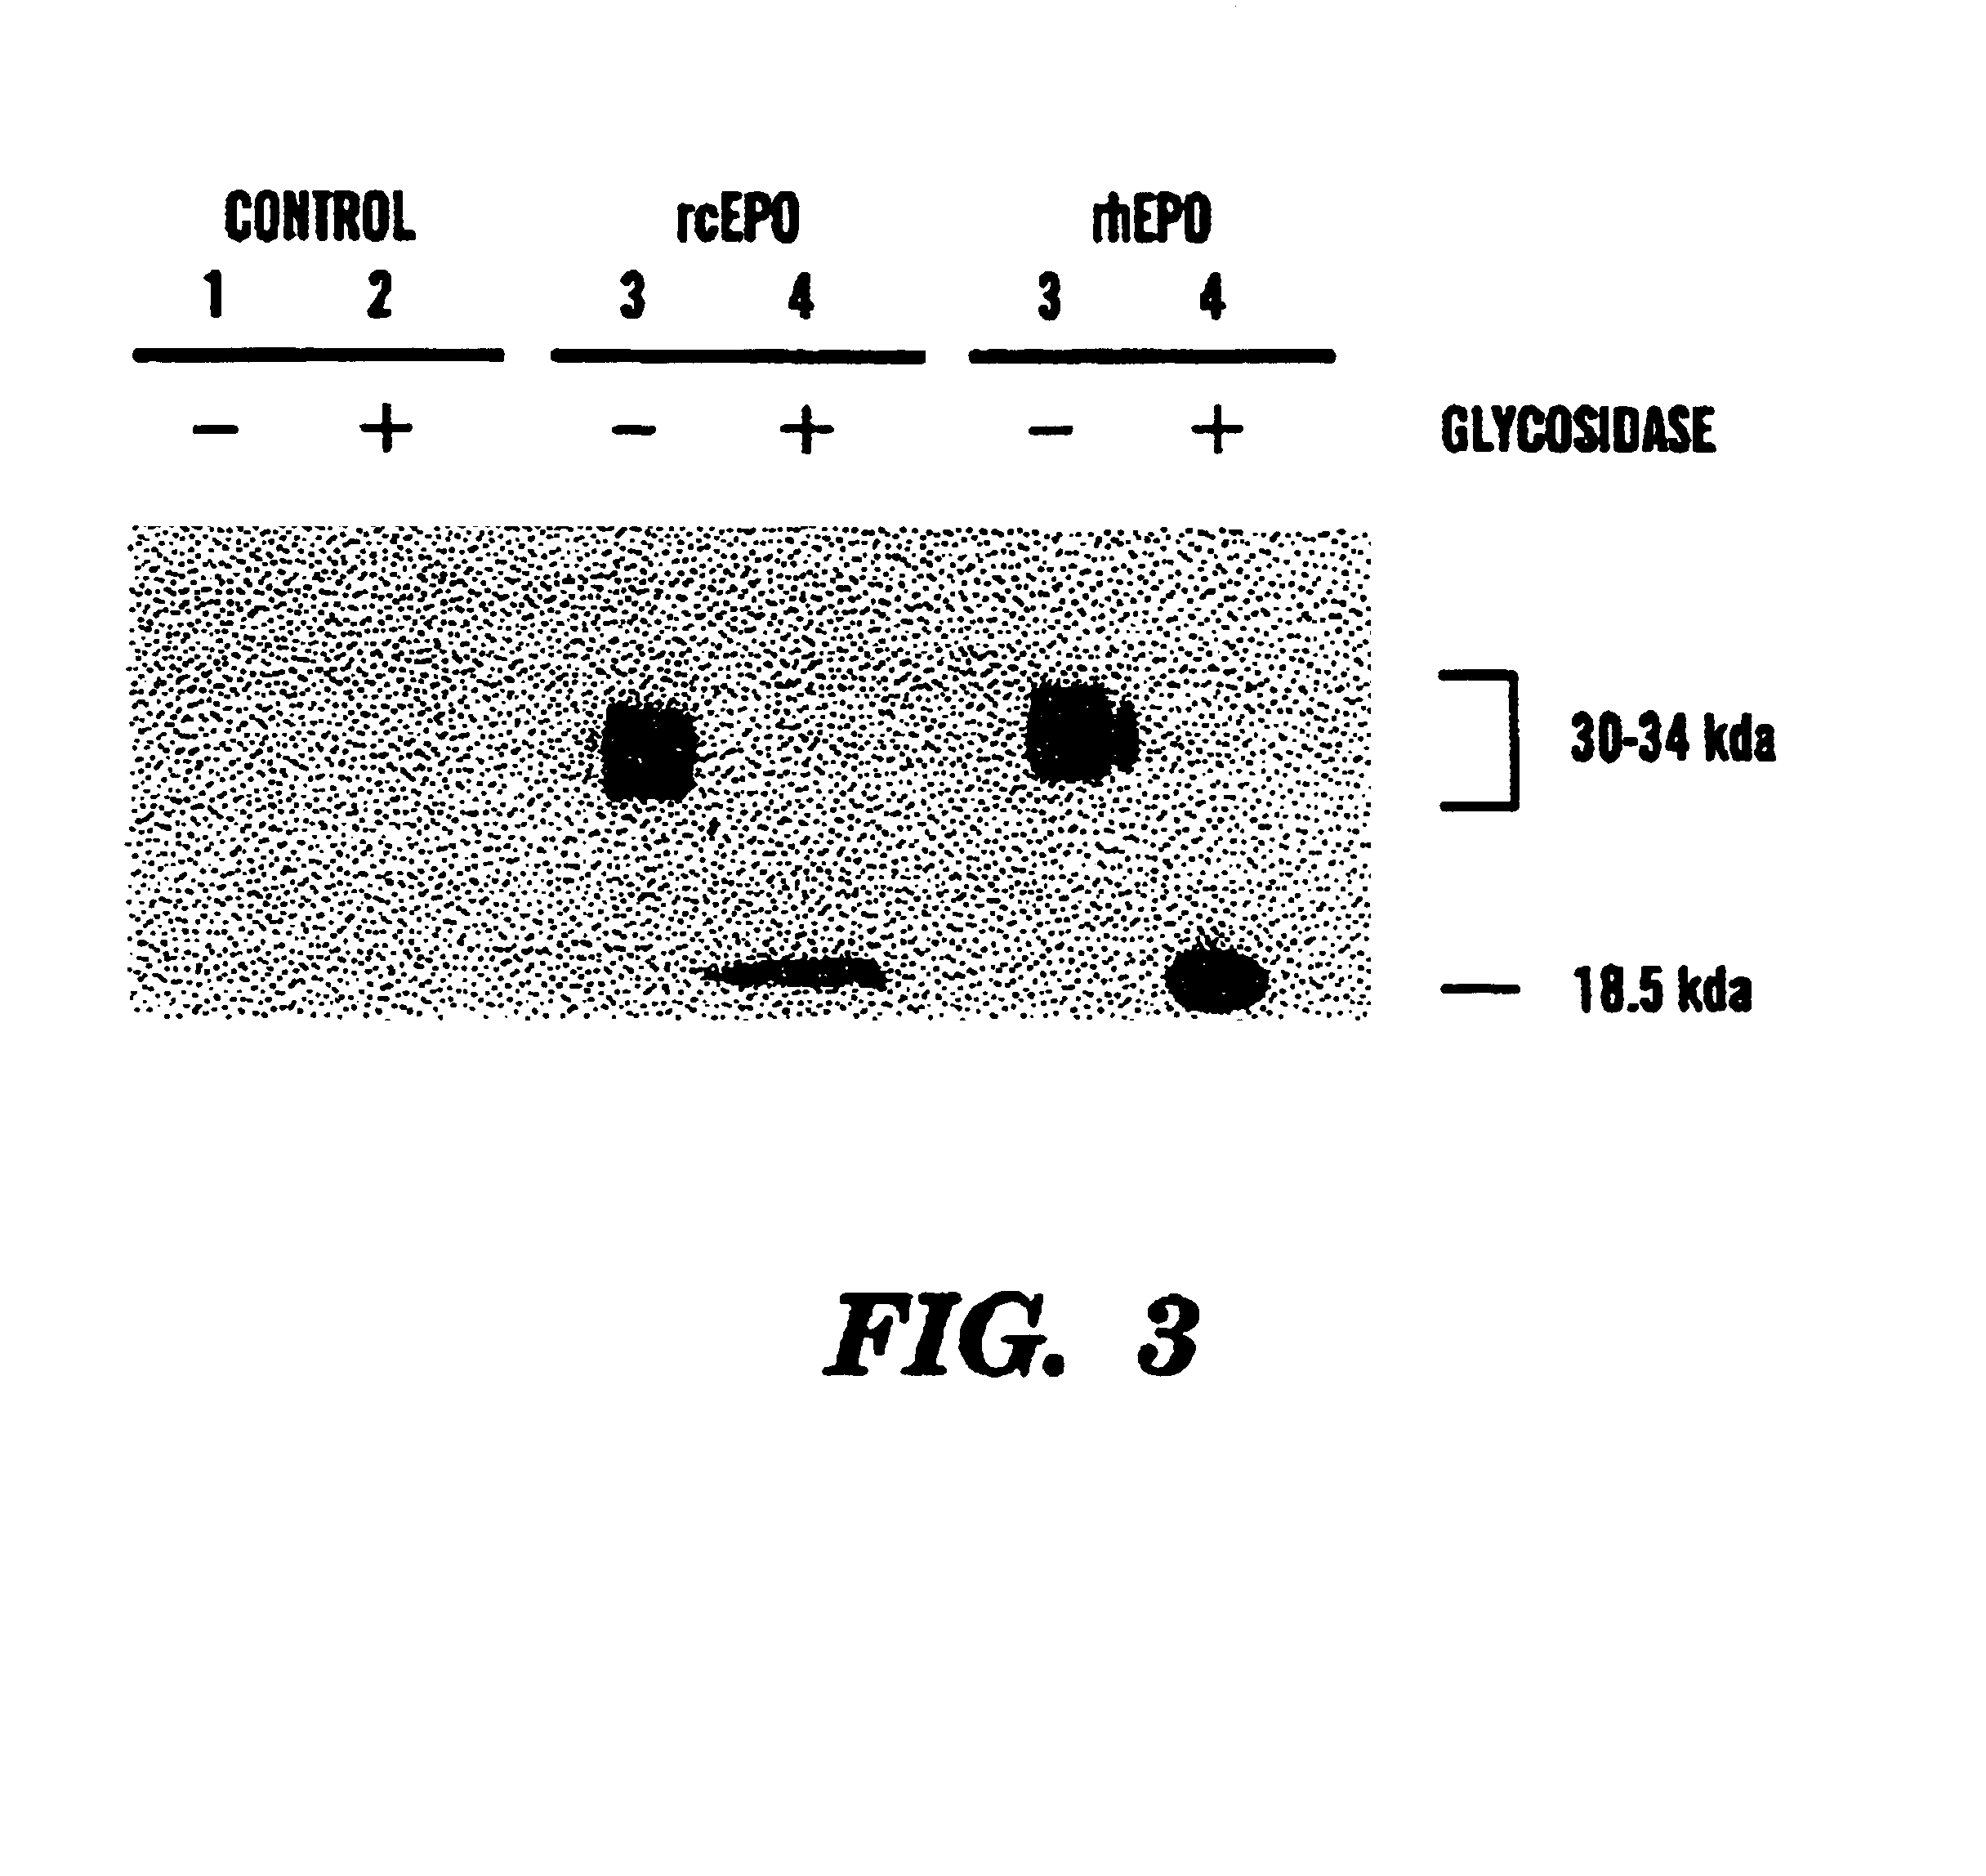 Canine erythropoietin gene and recombinant protein